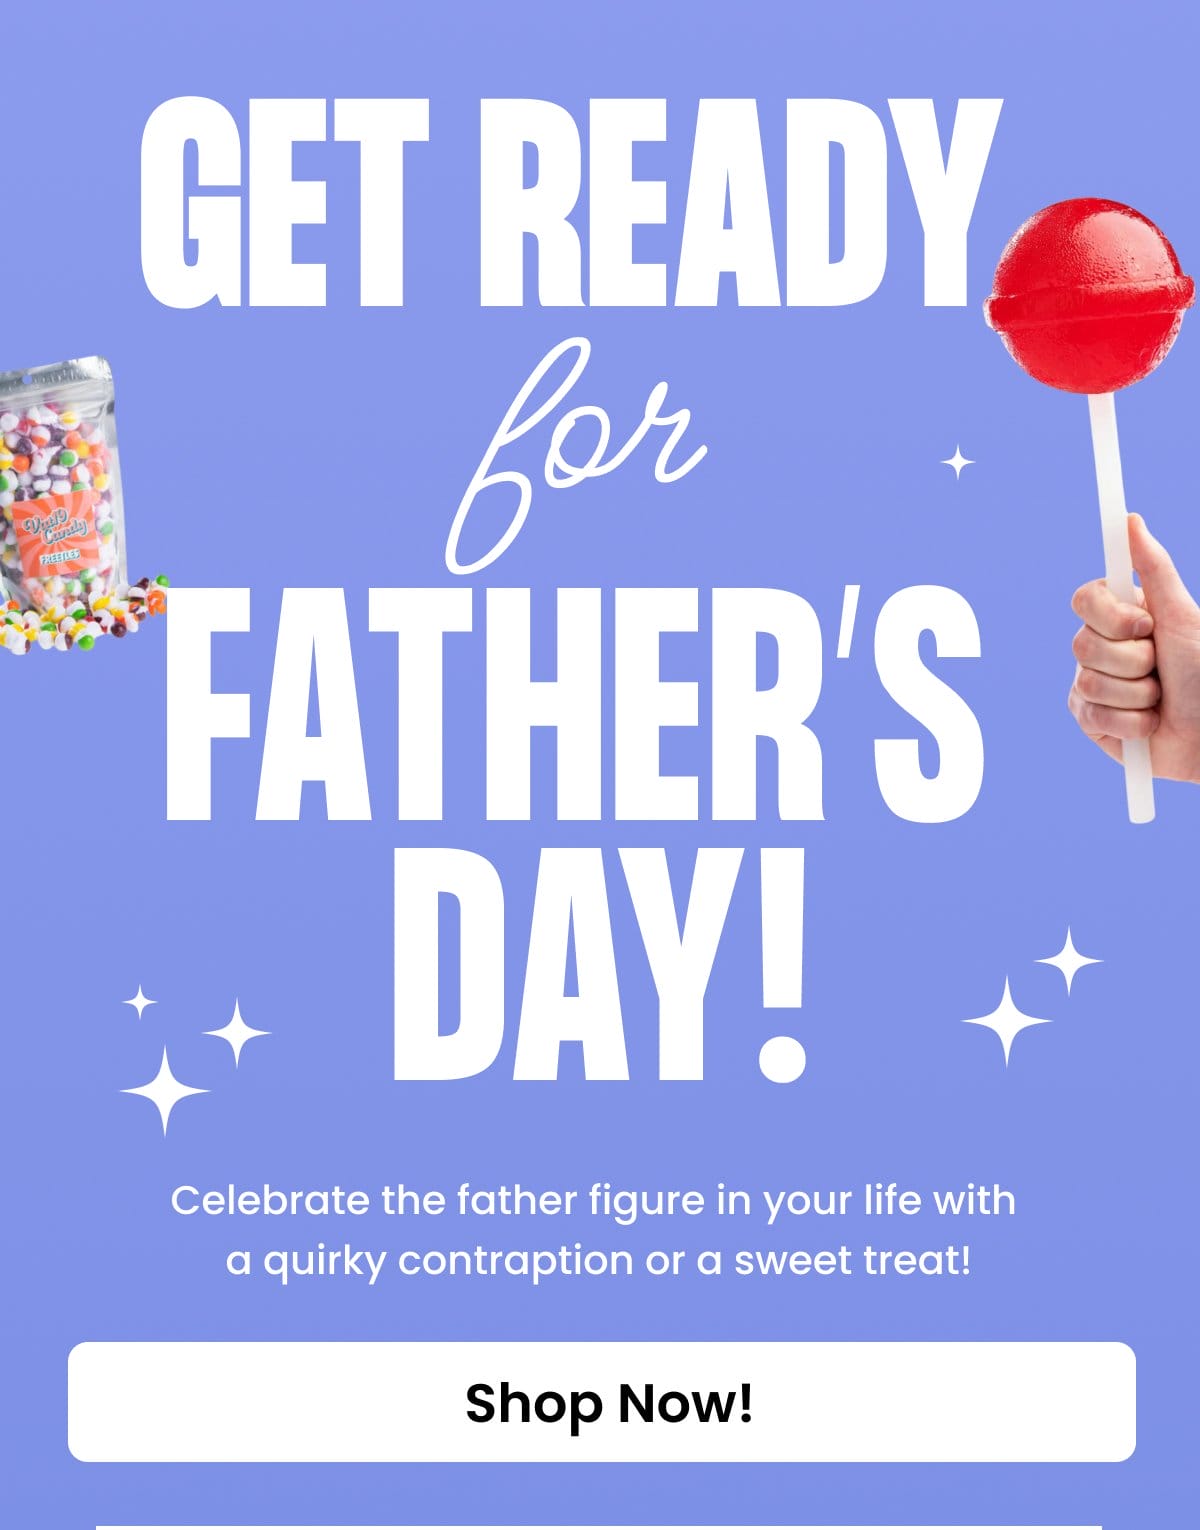 Get Ready For Father's Day!